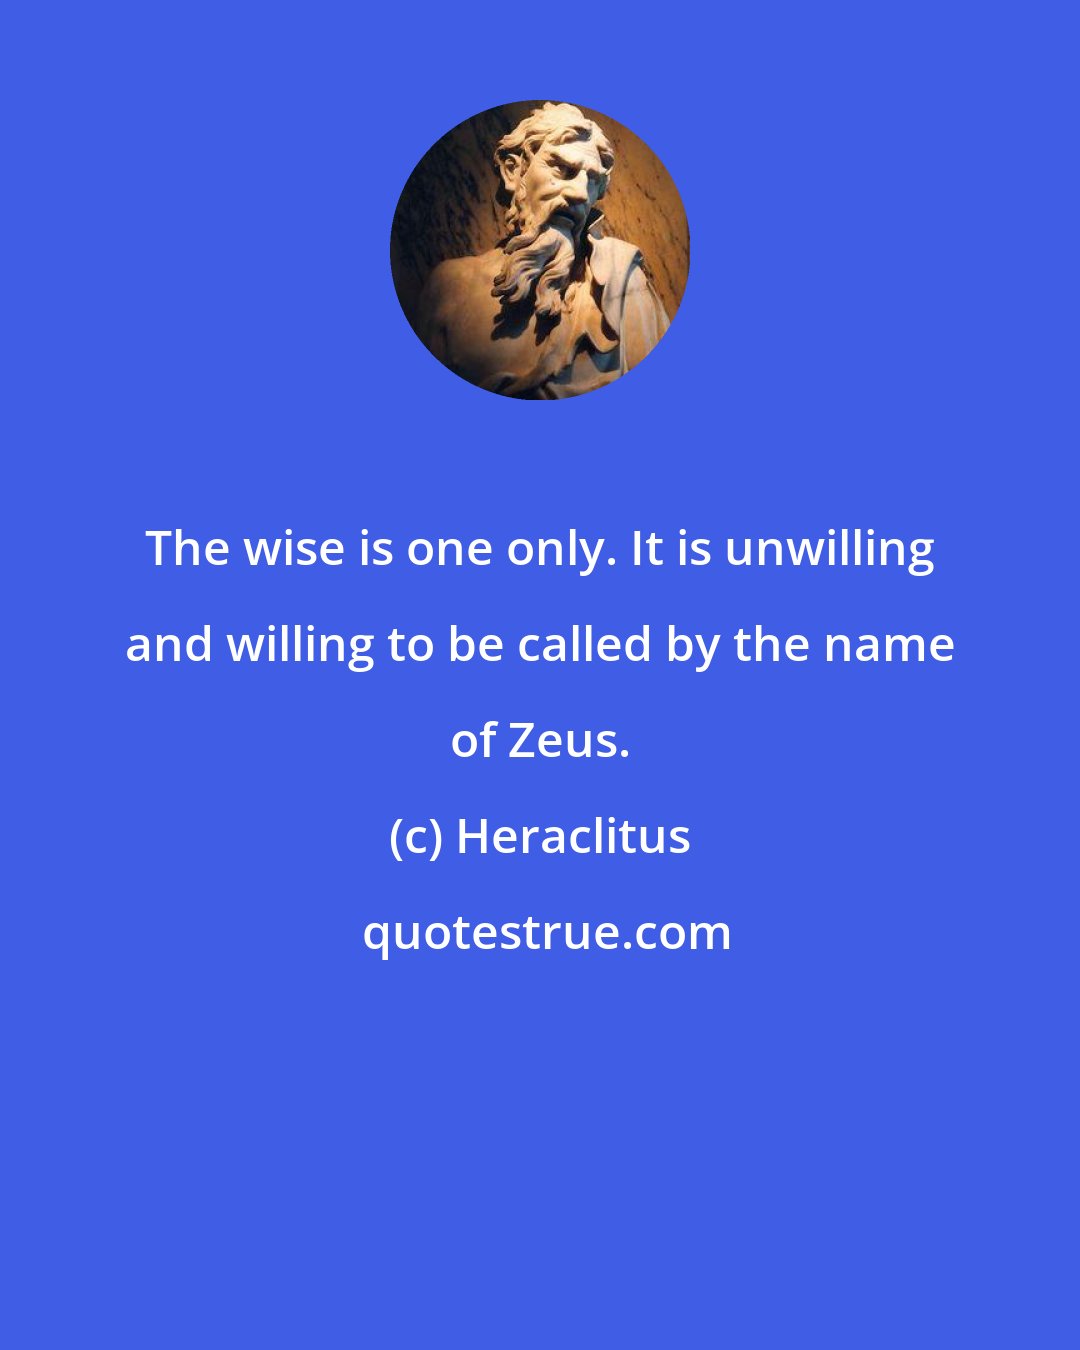 Heraclitus: The wise is one only. It is unwilling and willing to be called by the name of Zeus.